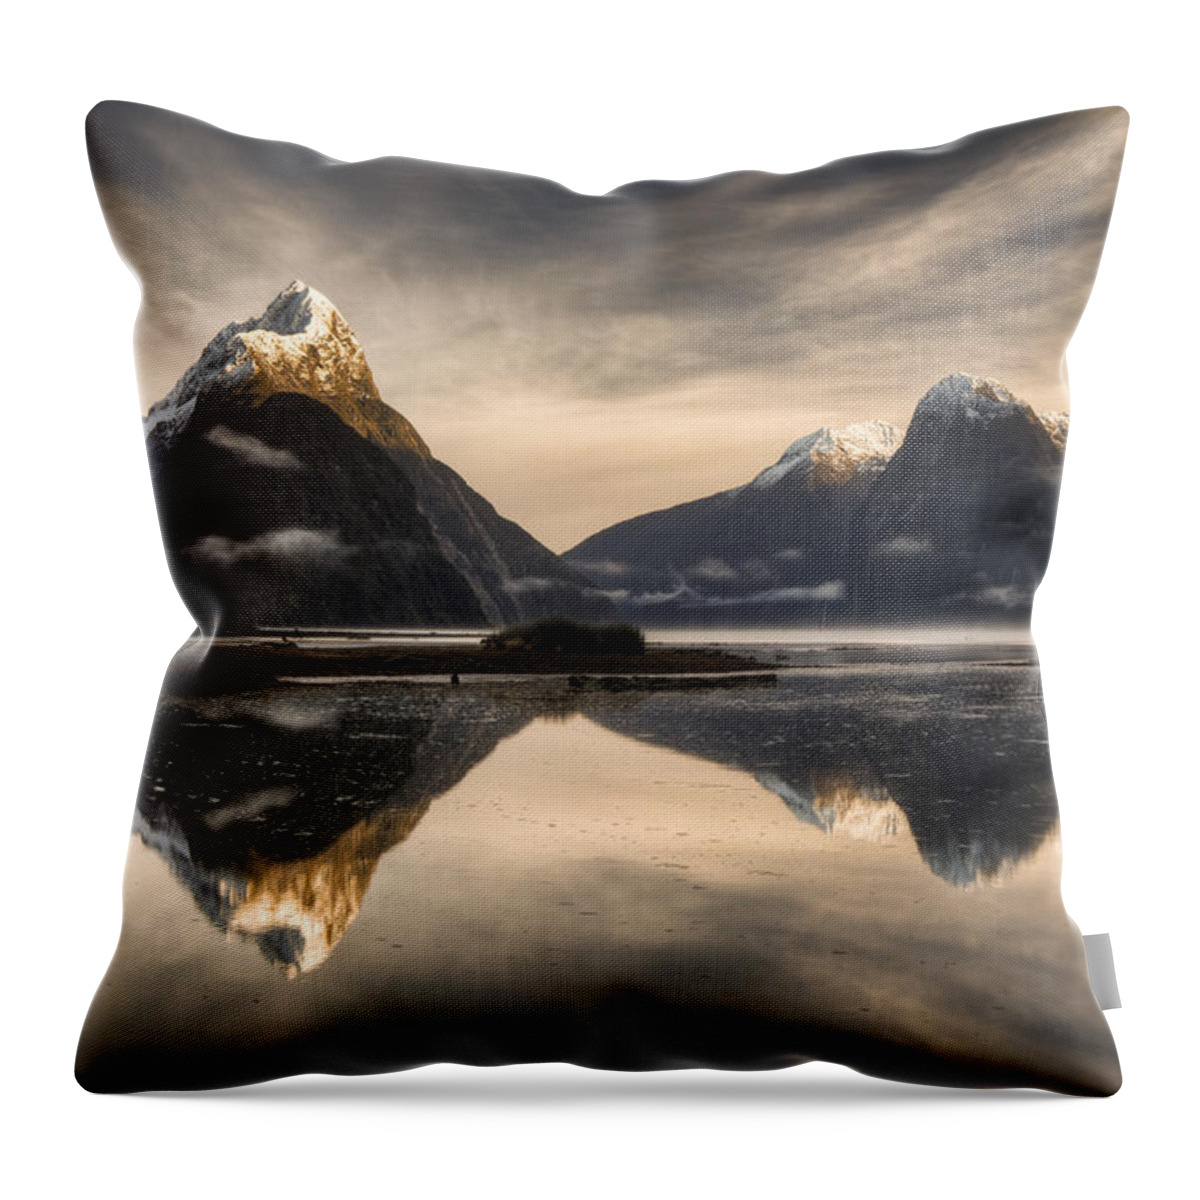 00446721 Throw Pillow featuring the photograph Mitre Peak And Milford Sound by Colin Monteath